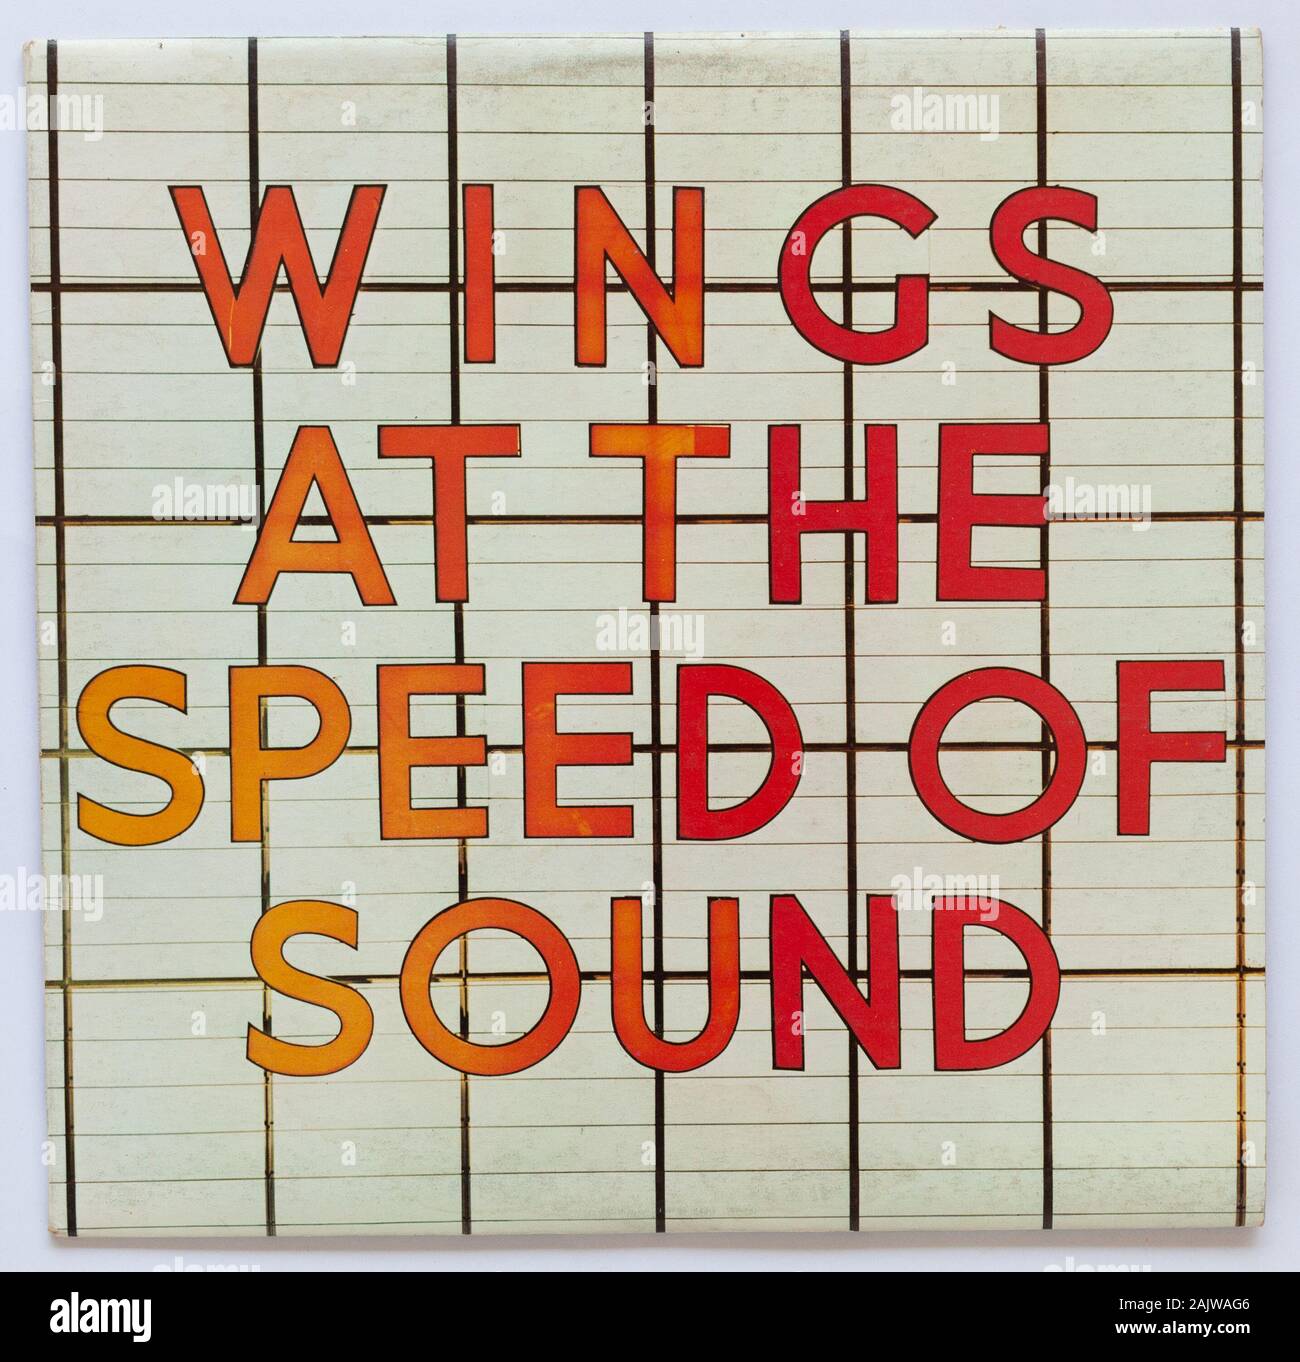 The cover of Wings At  The Speed Of Sound. 1976 album by Wings on Capitol - Editorial use only Stock Photo